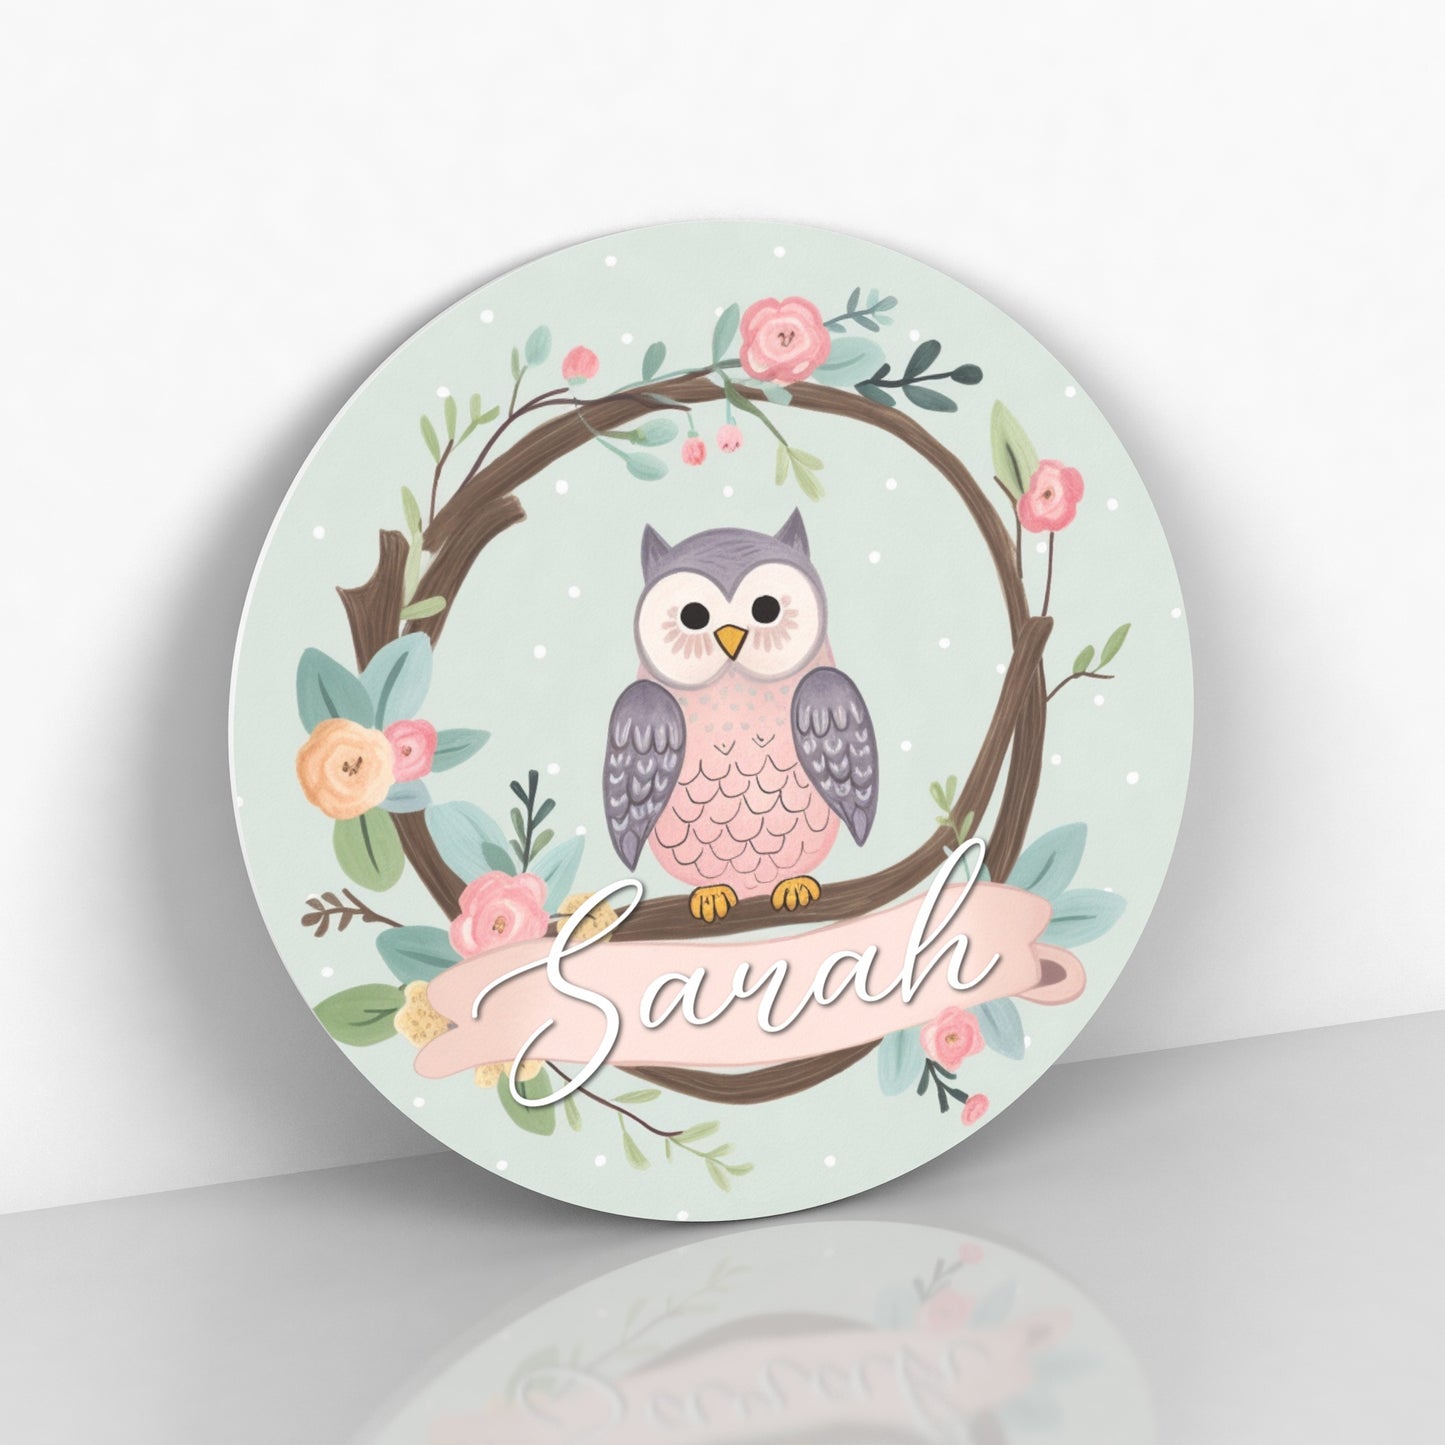 Personalized Name Sign with Woodland Owls - Name Sign for Baby Girl Nursery Wall - Newborn Girl Gift Idea